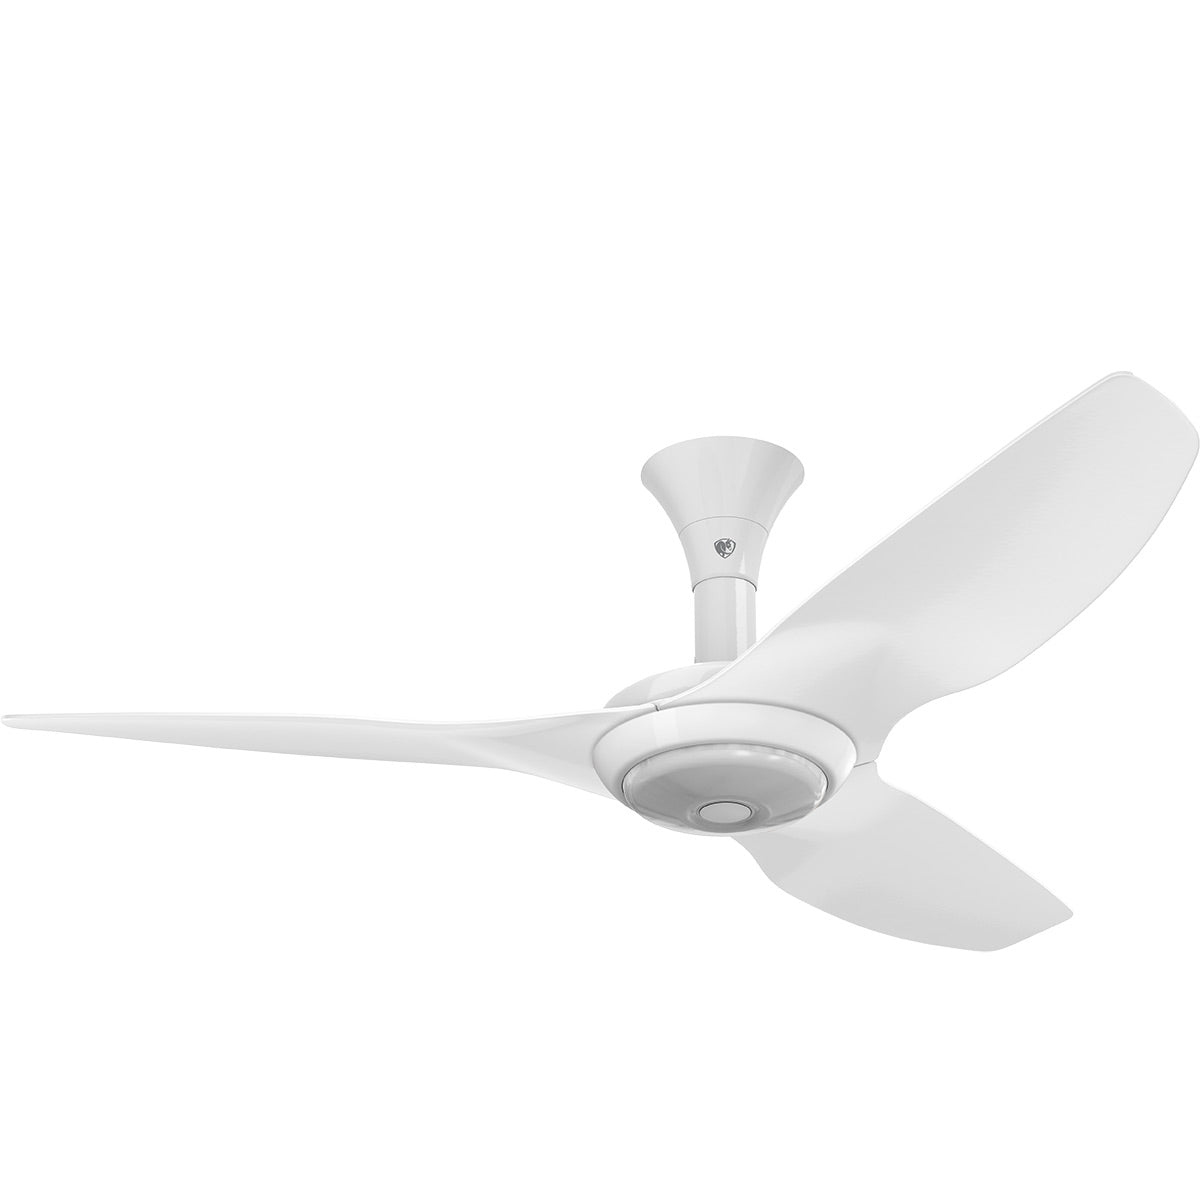 Big Ass Fans HAIKU 52 Inch Ceiling Fan WiFi with LED Light and Bluetooth Remote - White